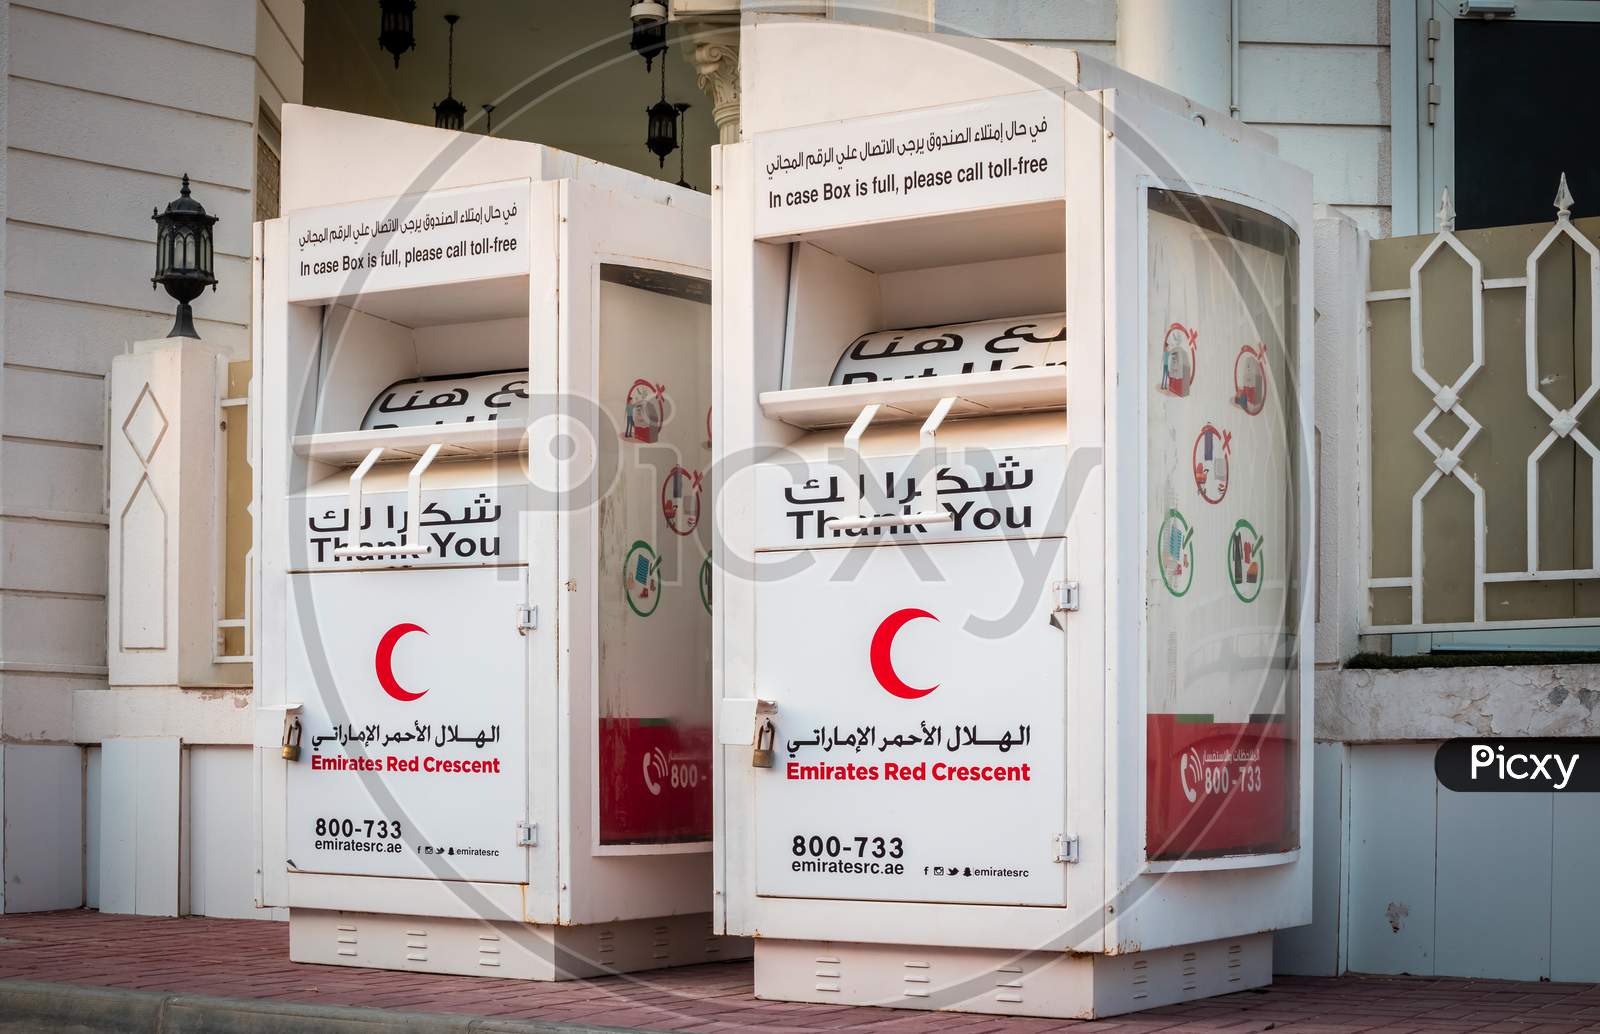 Emirates Red Crescent In Abu Dhabi.